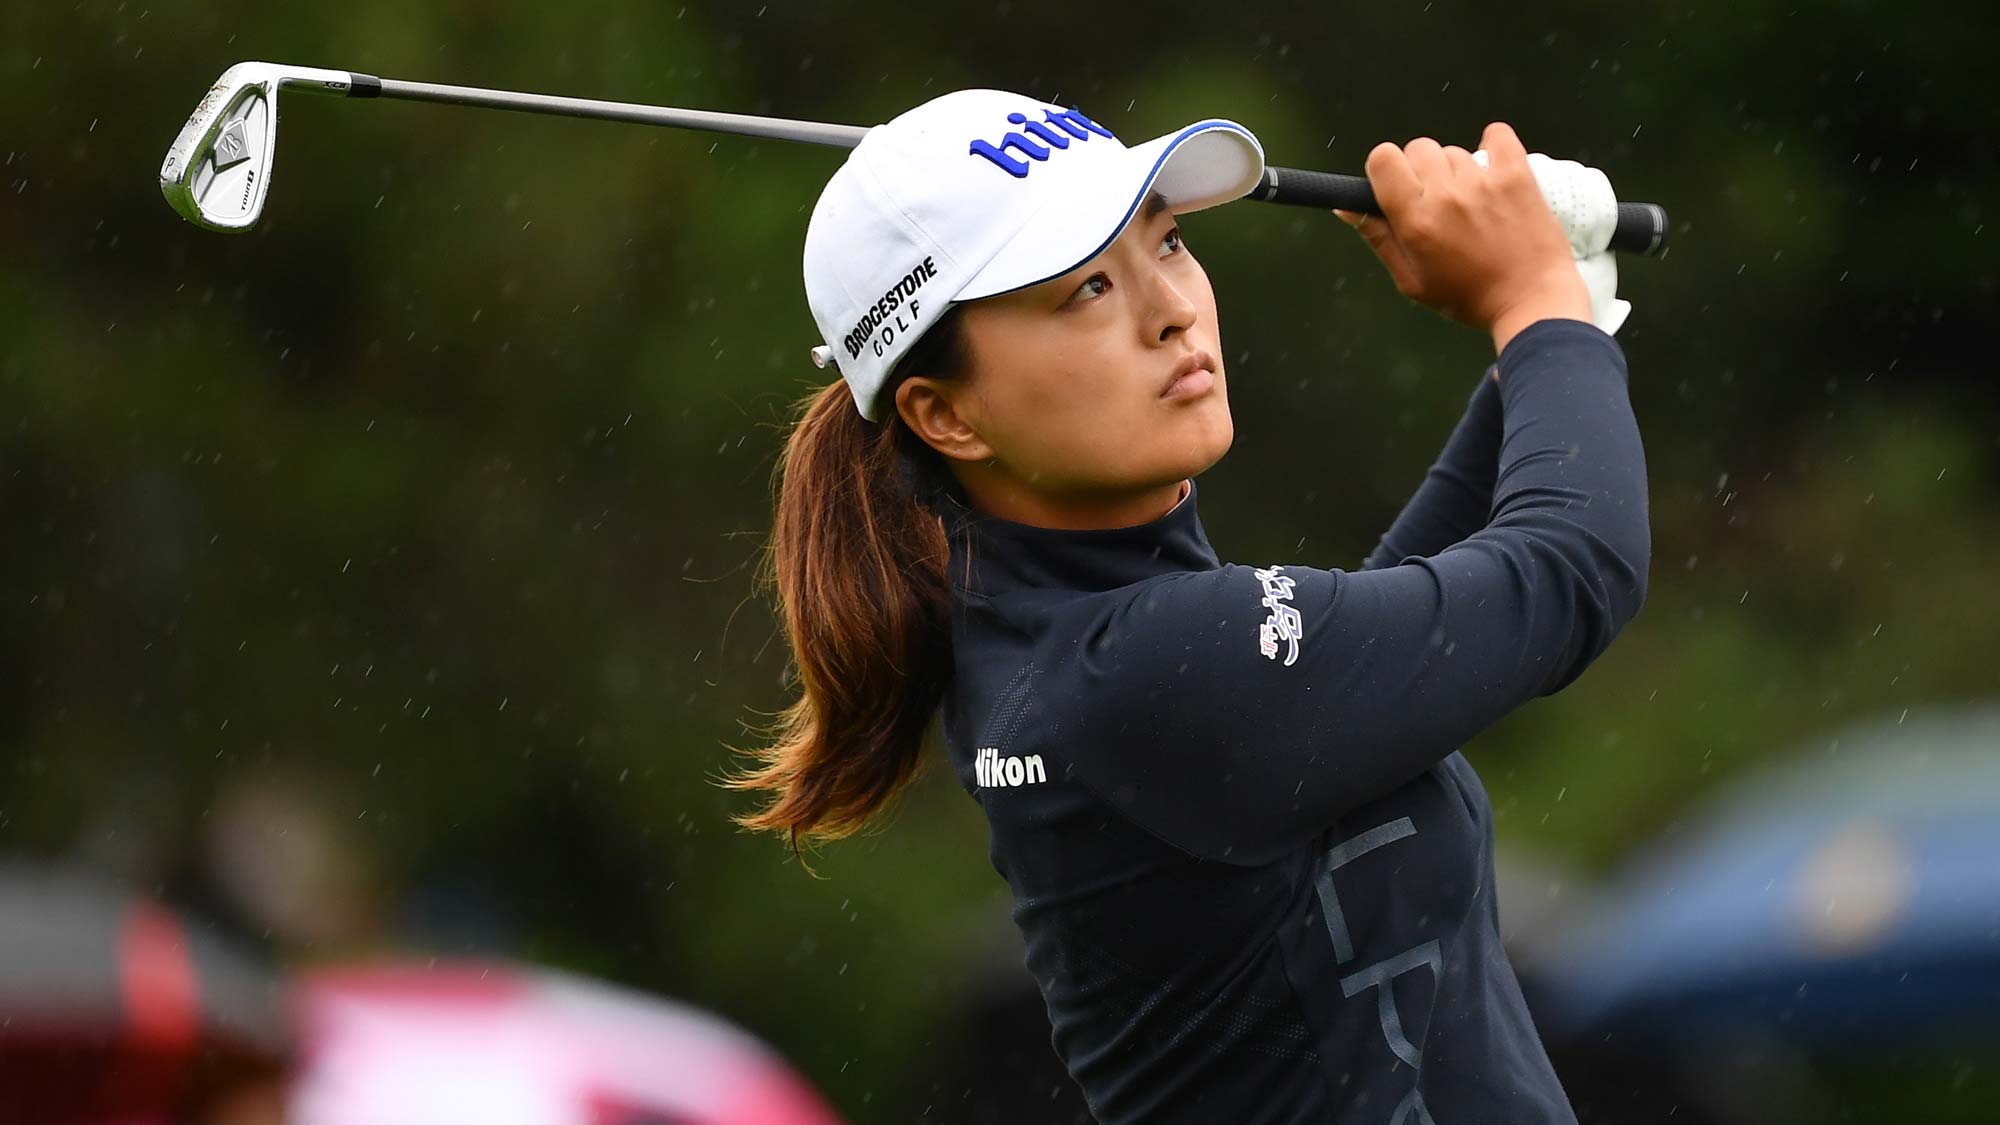 Jin Young Ko of South Korea in action on the 7th hole during day 4 of the Evian Championship